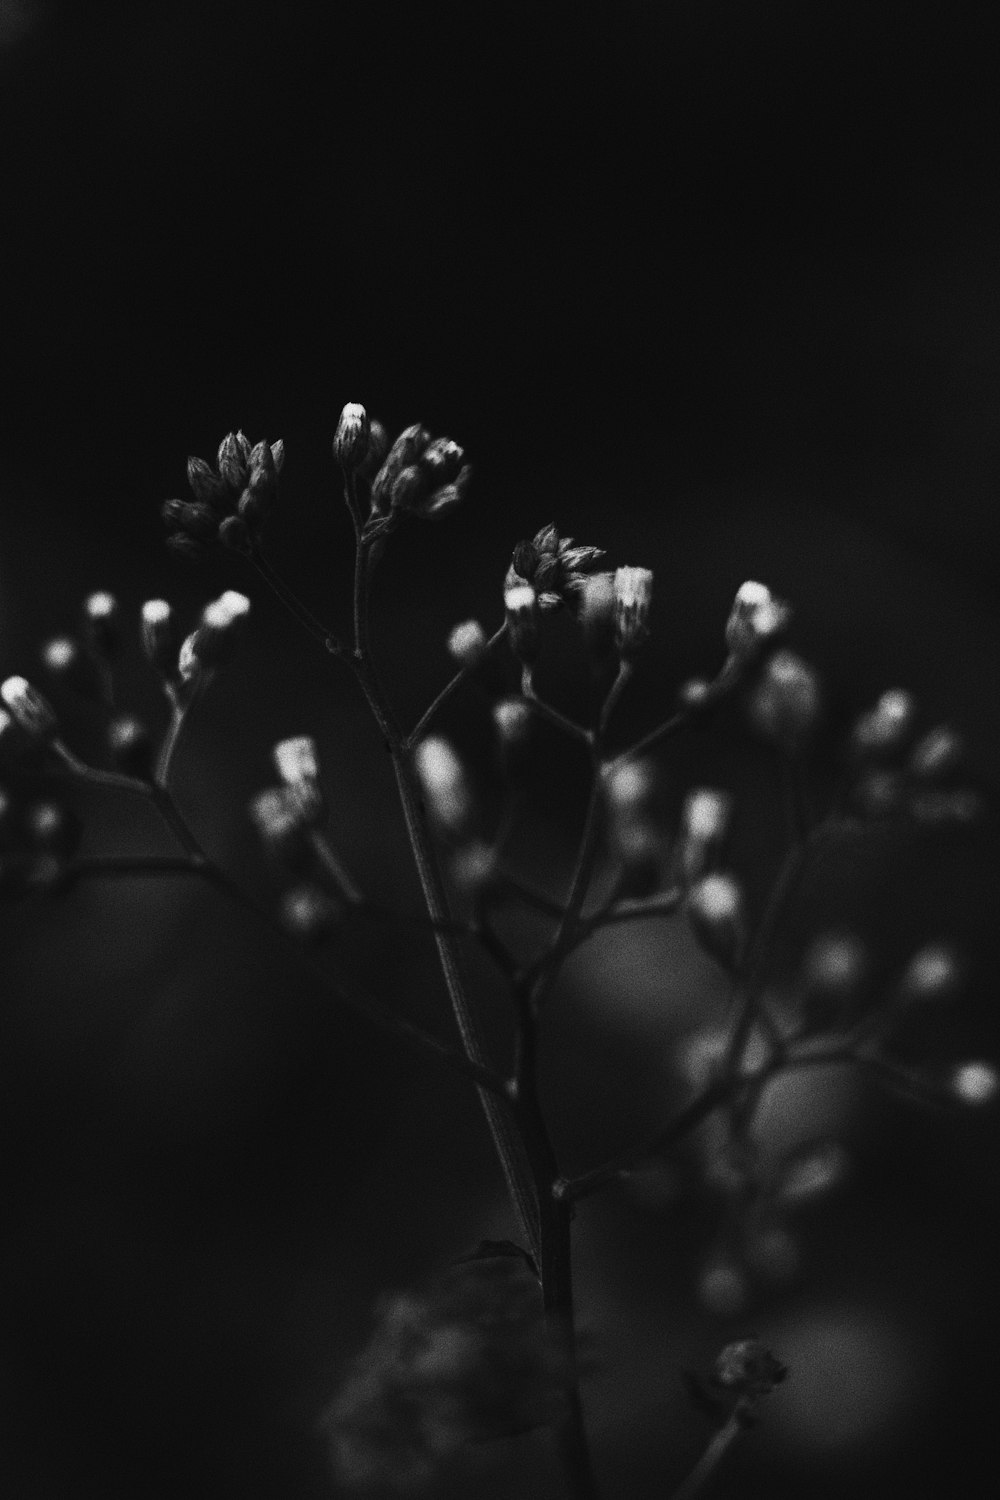 grayscale photo of flower buds